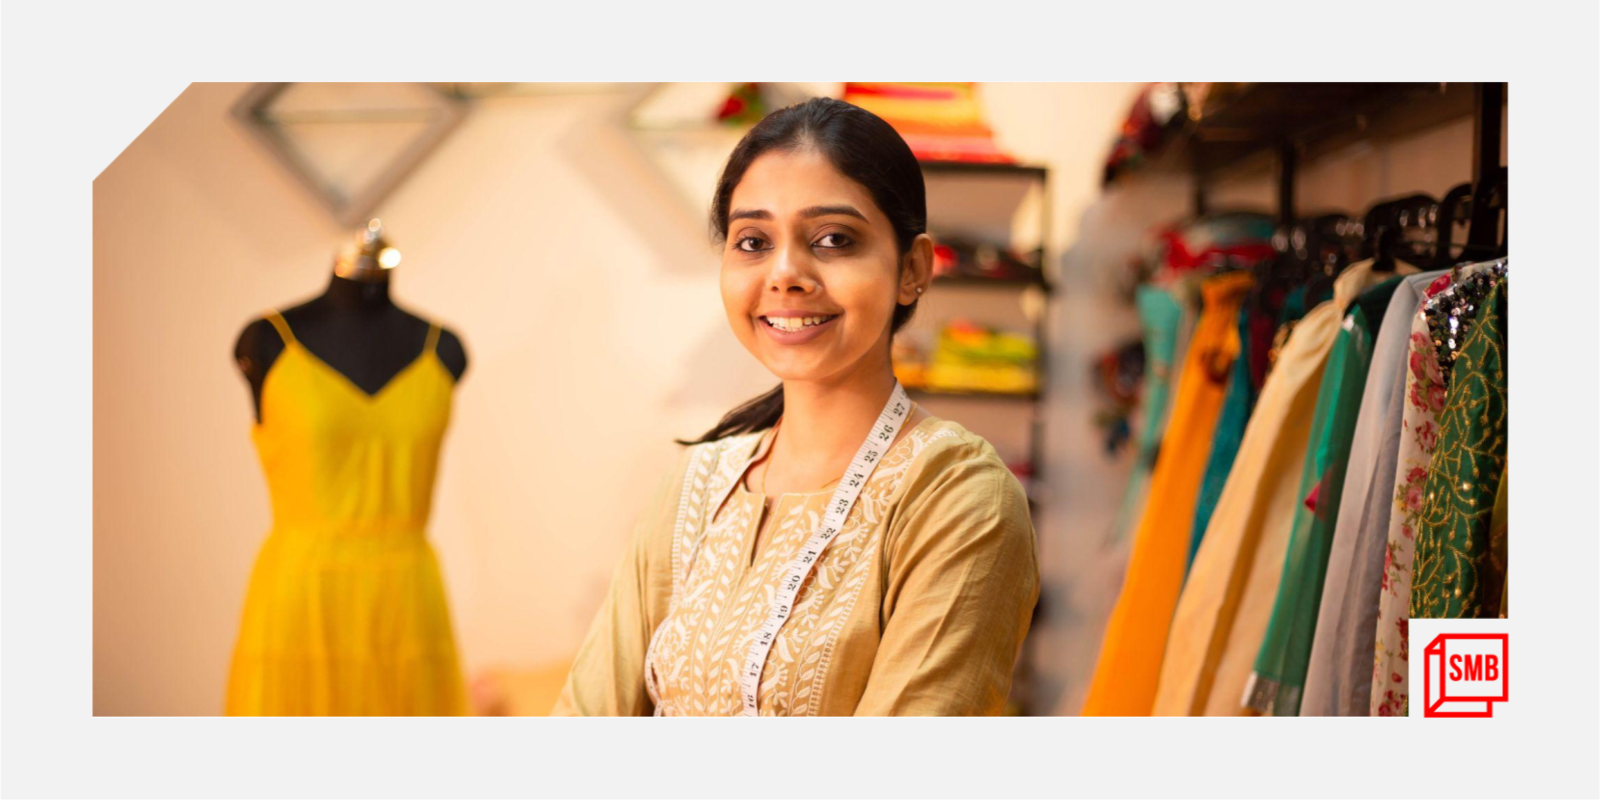 How to start an online fashion business with Rs 10,000 initial investment